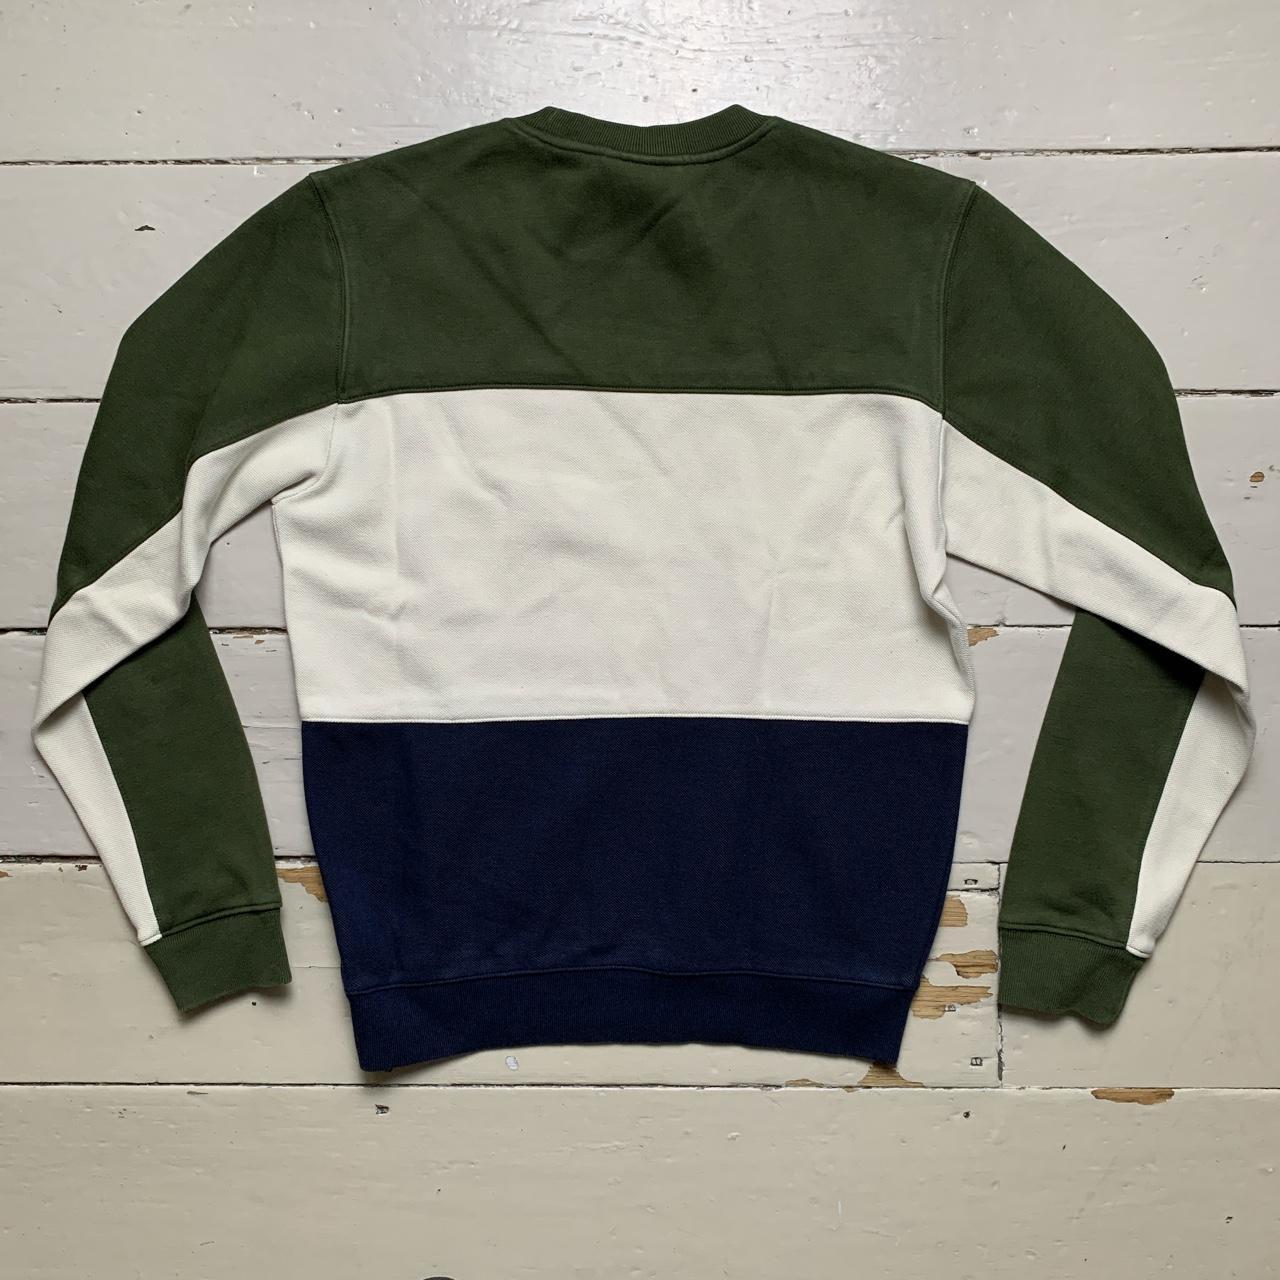 Lacoste Olive Green White and Navy Jumper